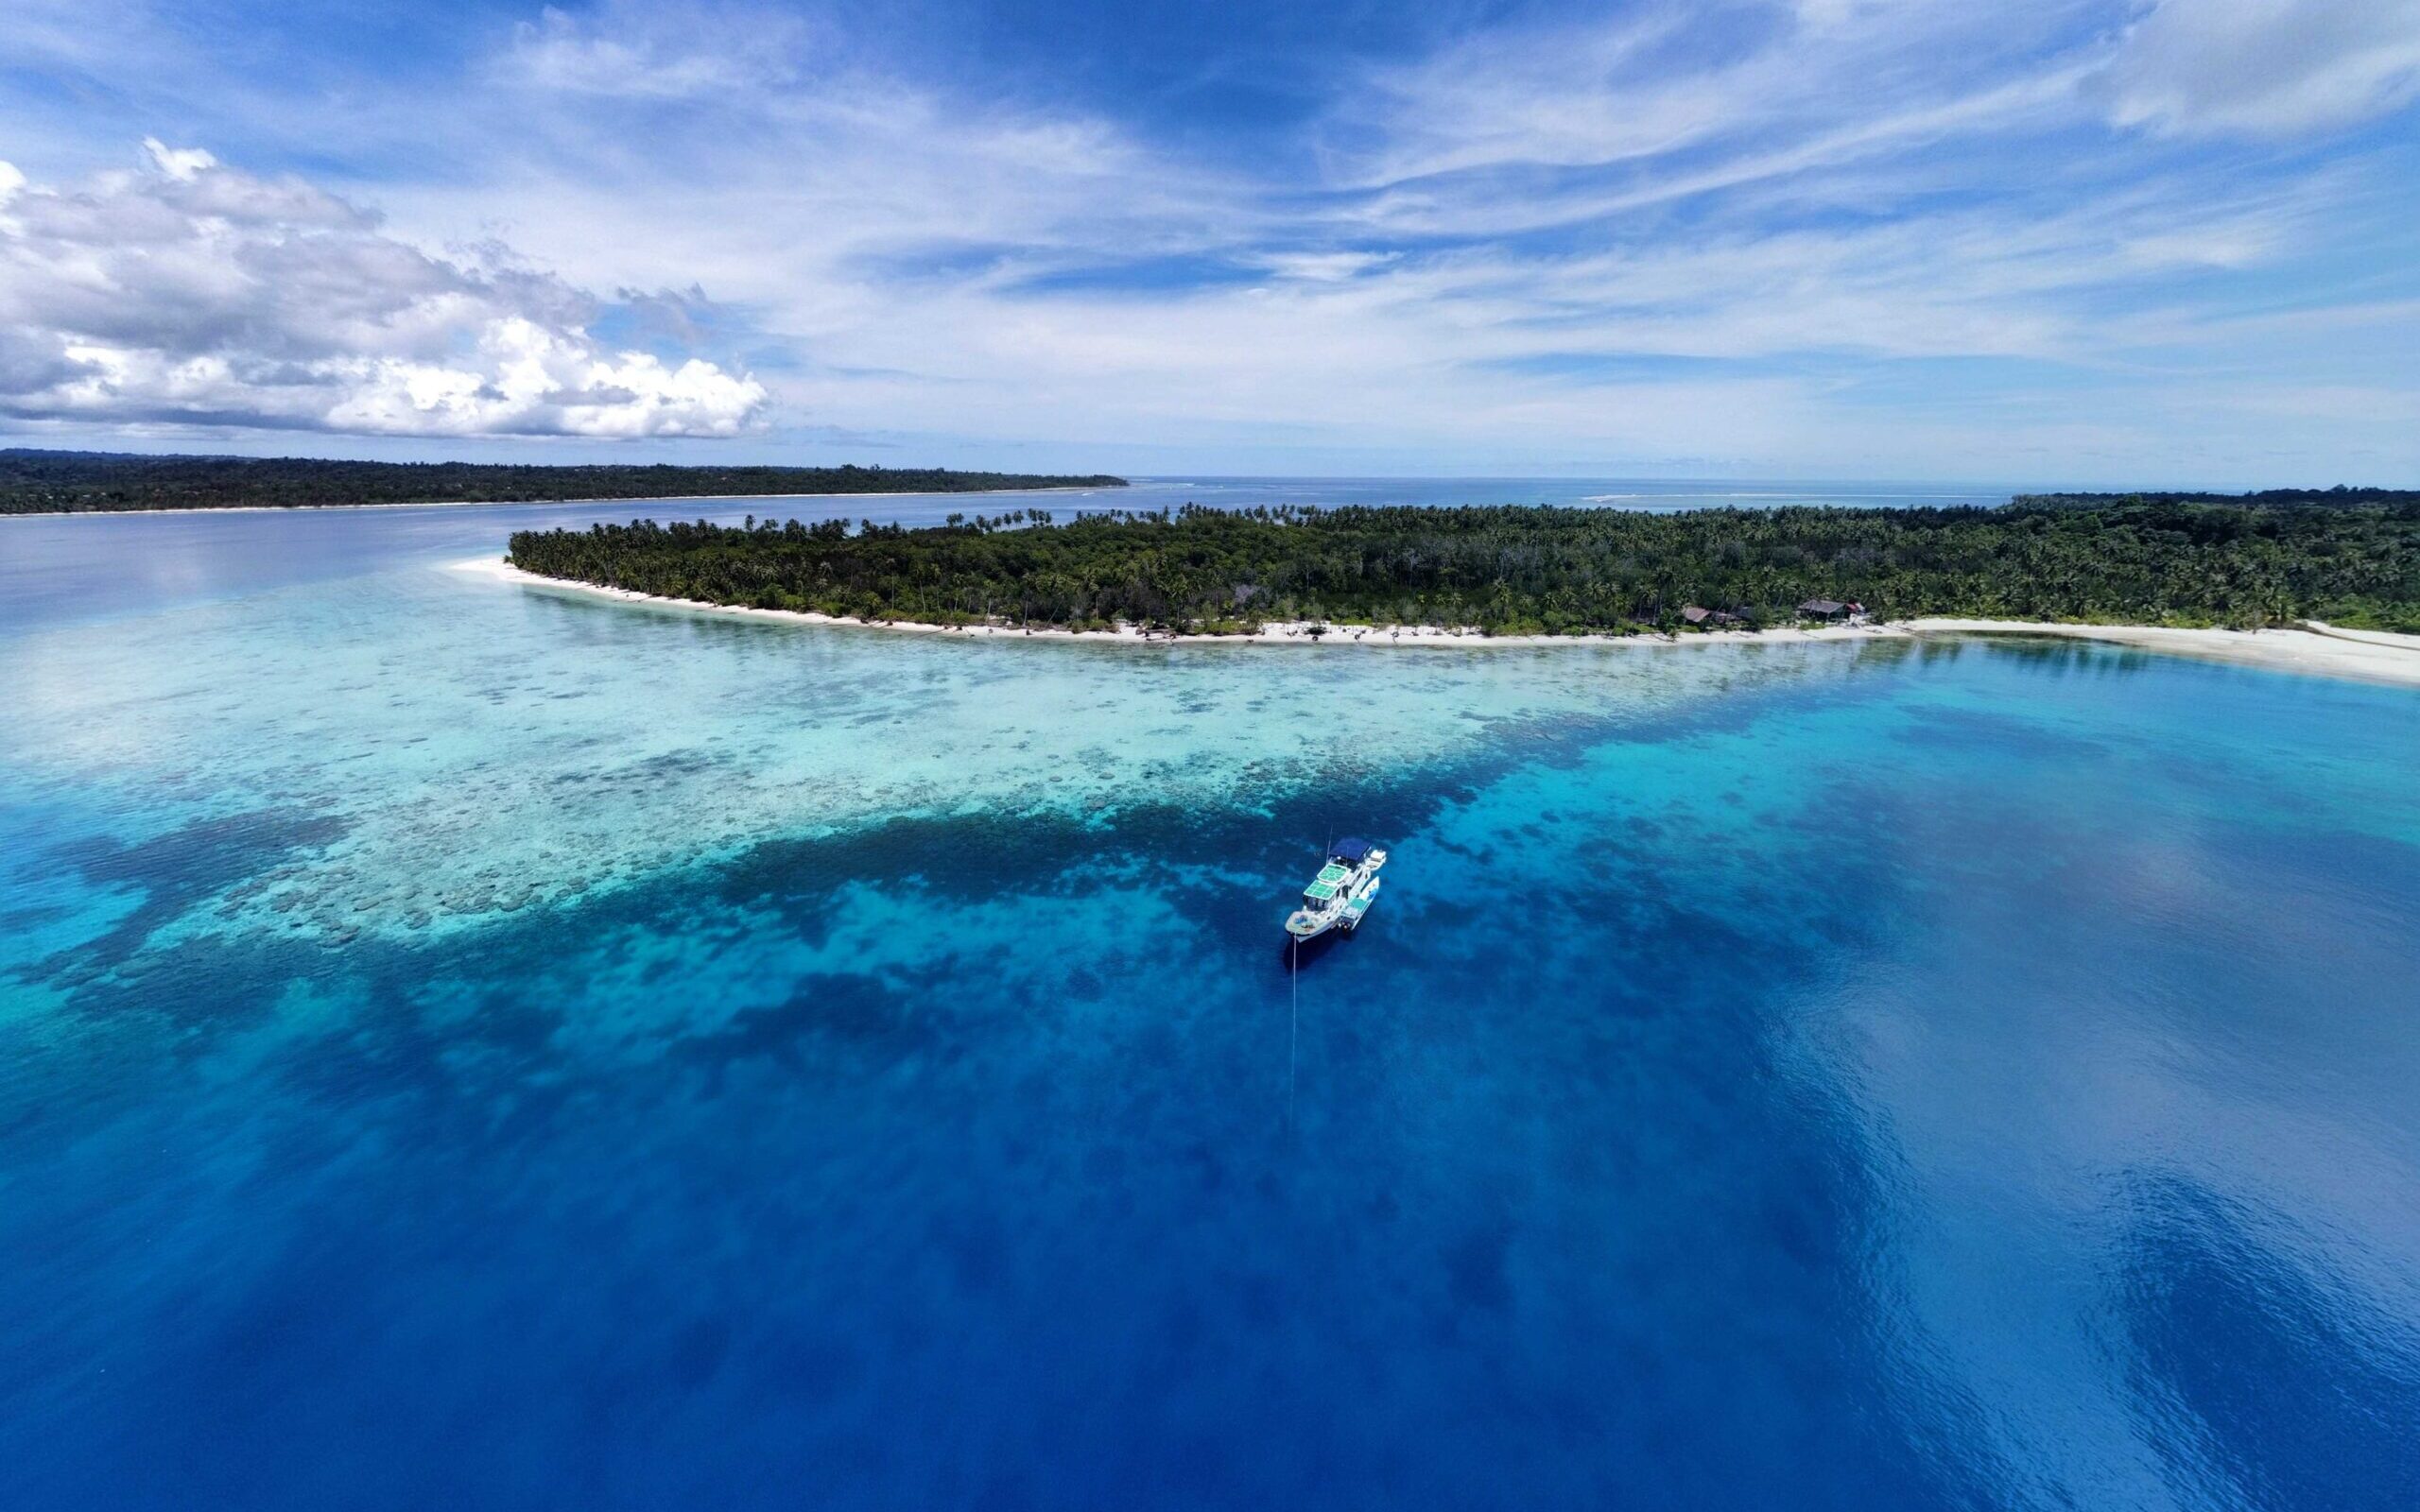 The Saraina surf charter boat cruising in the Mentawai Islands while hunting for perfect waves and barrels